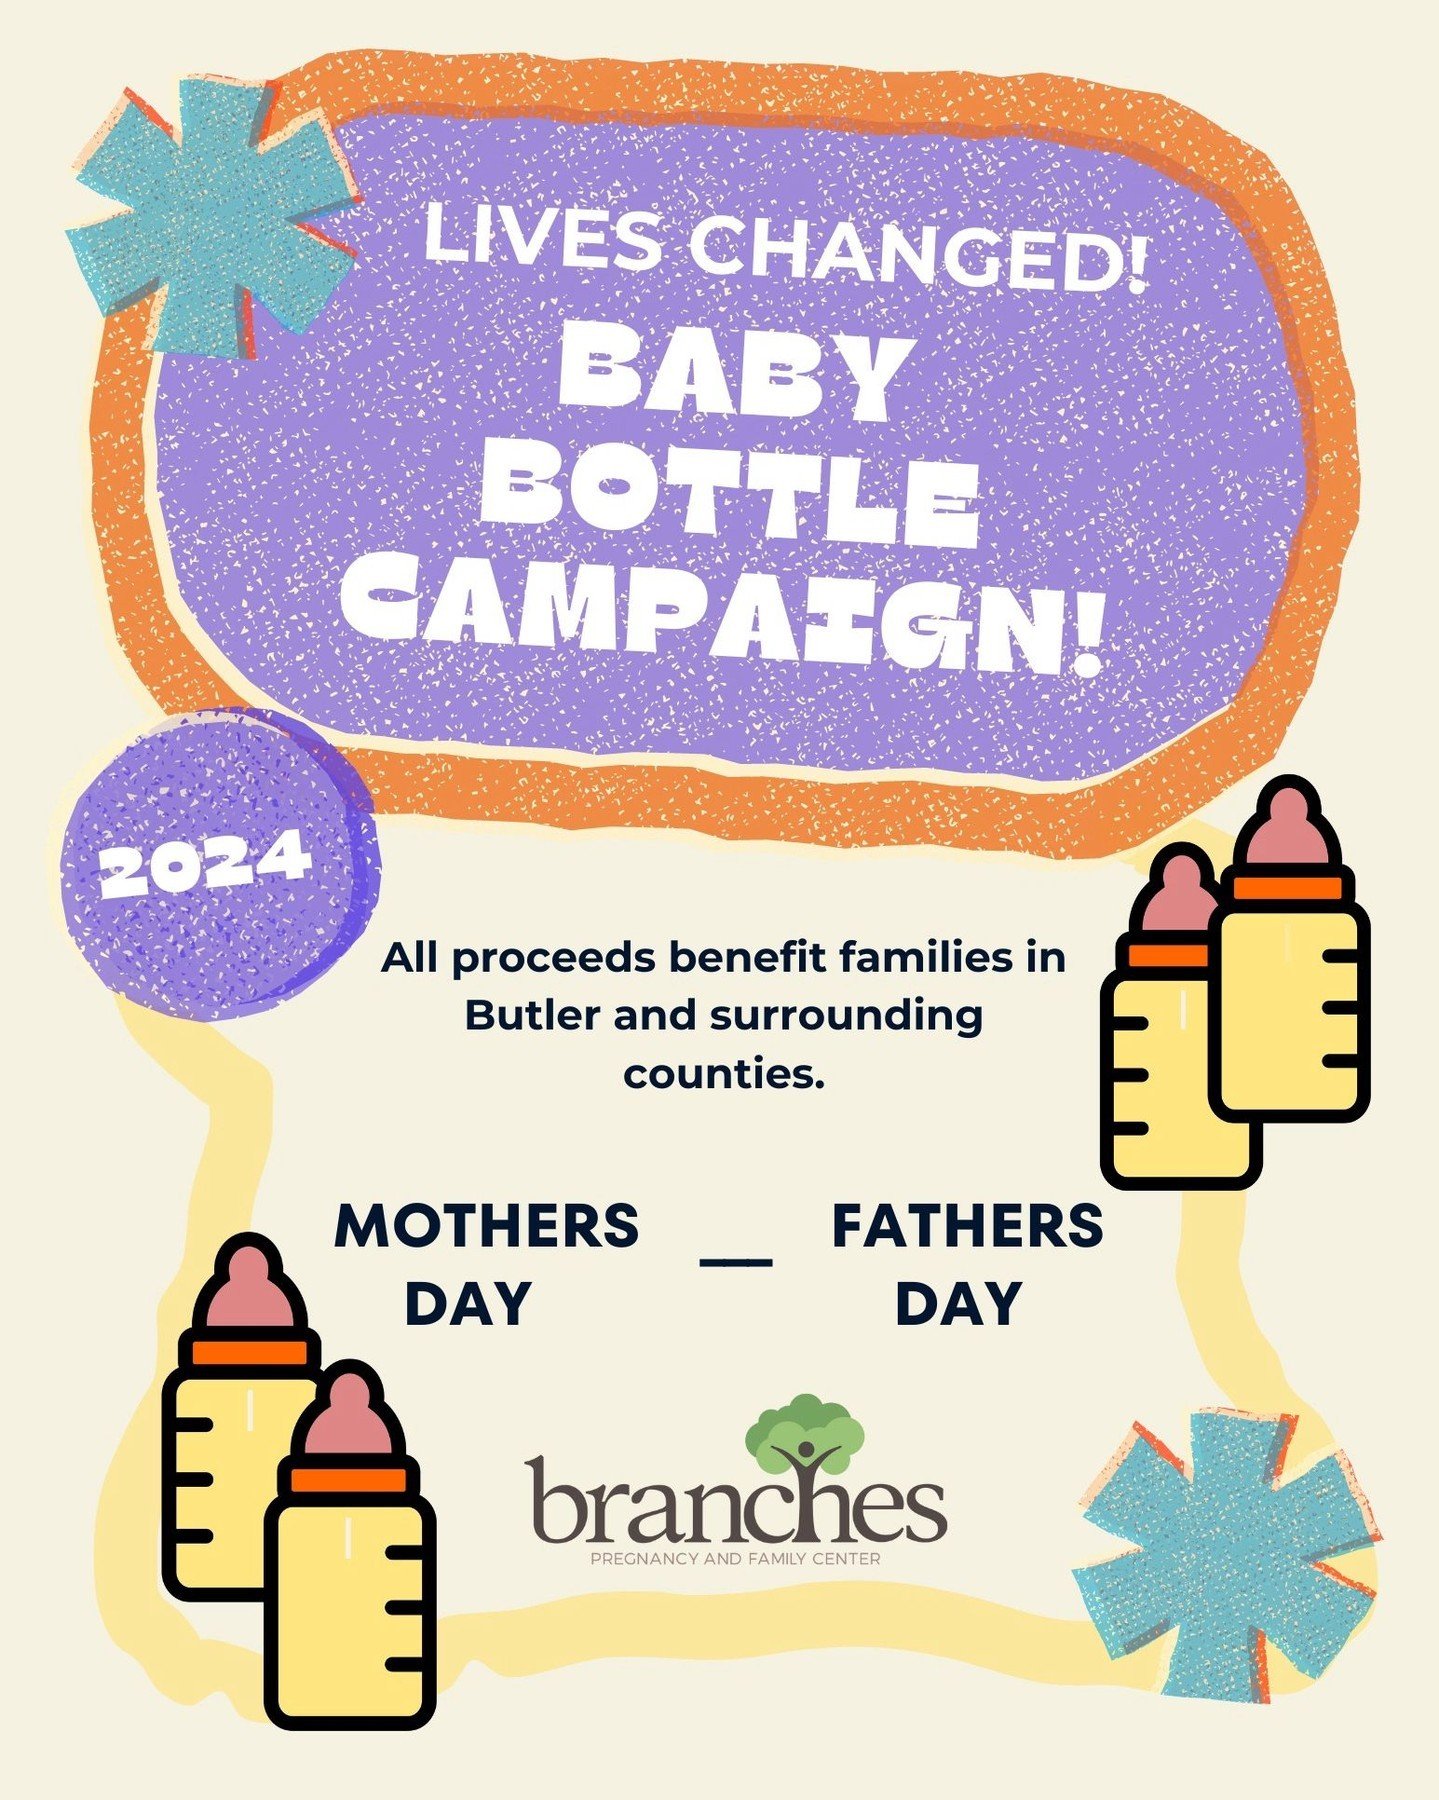 Branches Pregnancy &amp; Family Center will be collecting change between Mother&rsquo;s Day &amp; Father&rsquo;s Day.  Pick up a bottle from the table in the foyer on Mother&rsquo;s Day, fill it up with change and return by Father&rsquo;s Day.  All p